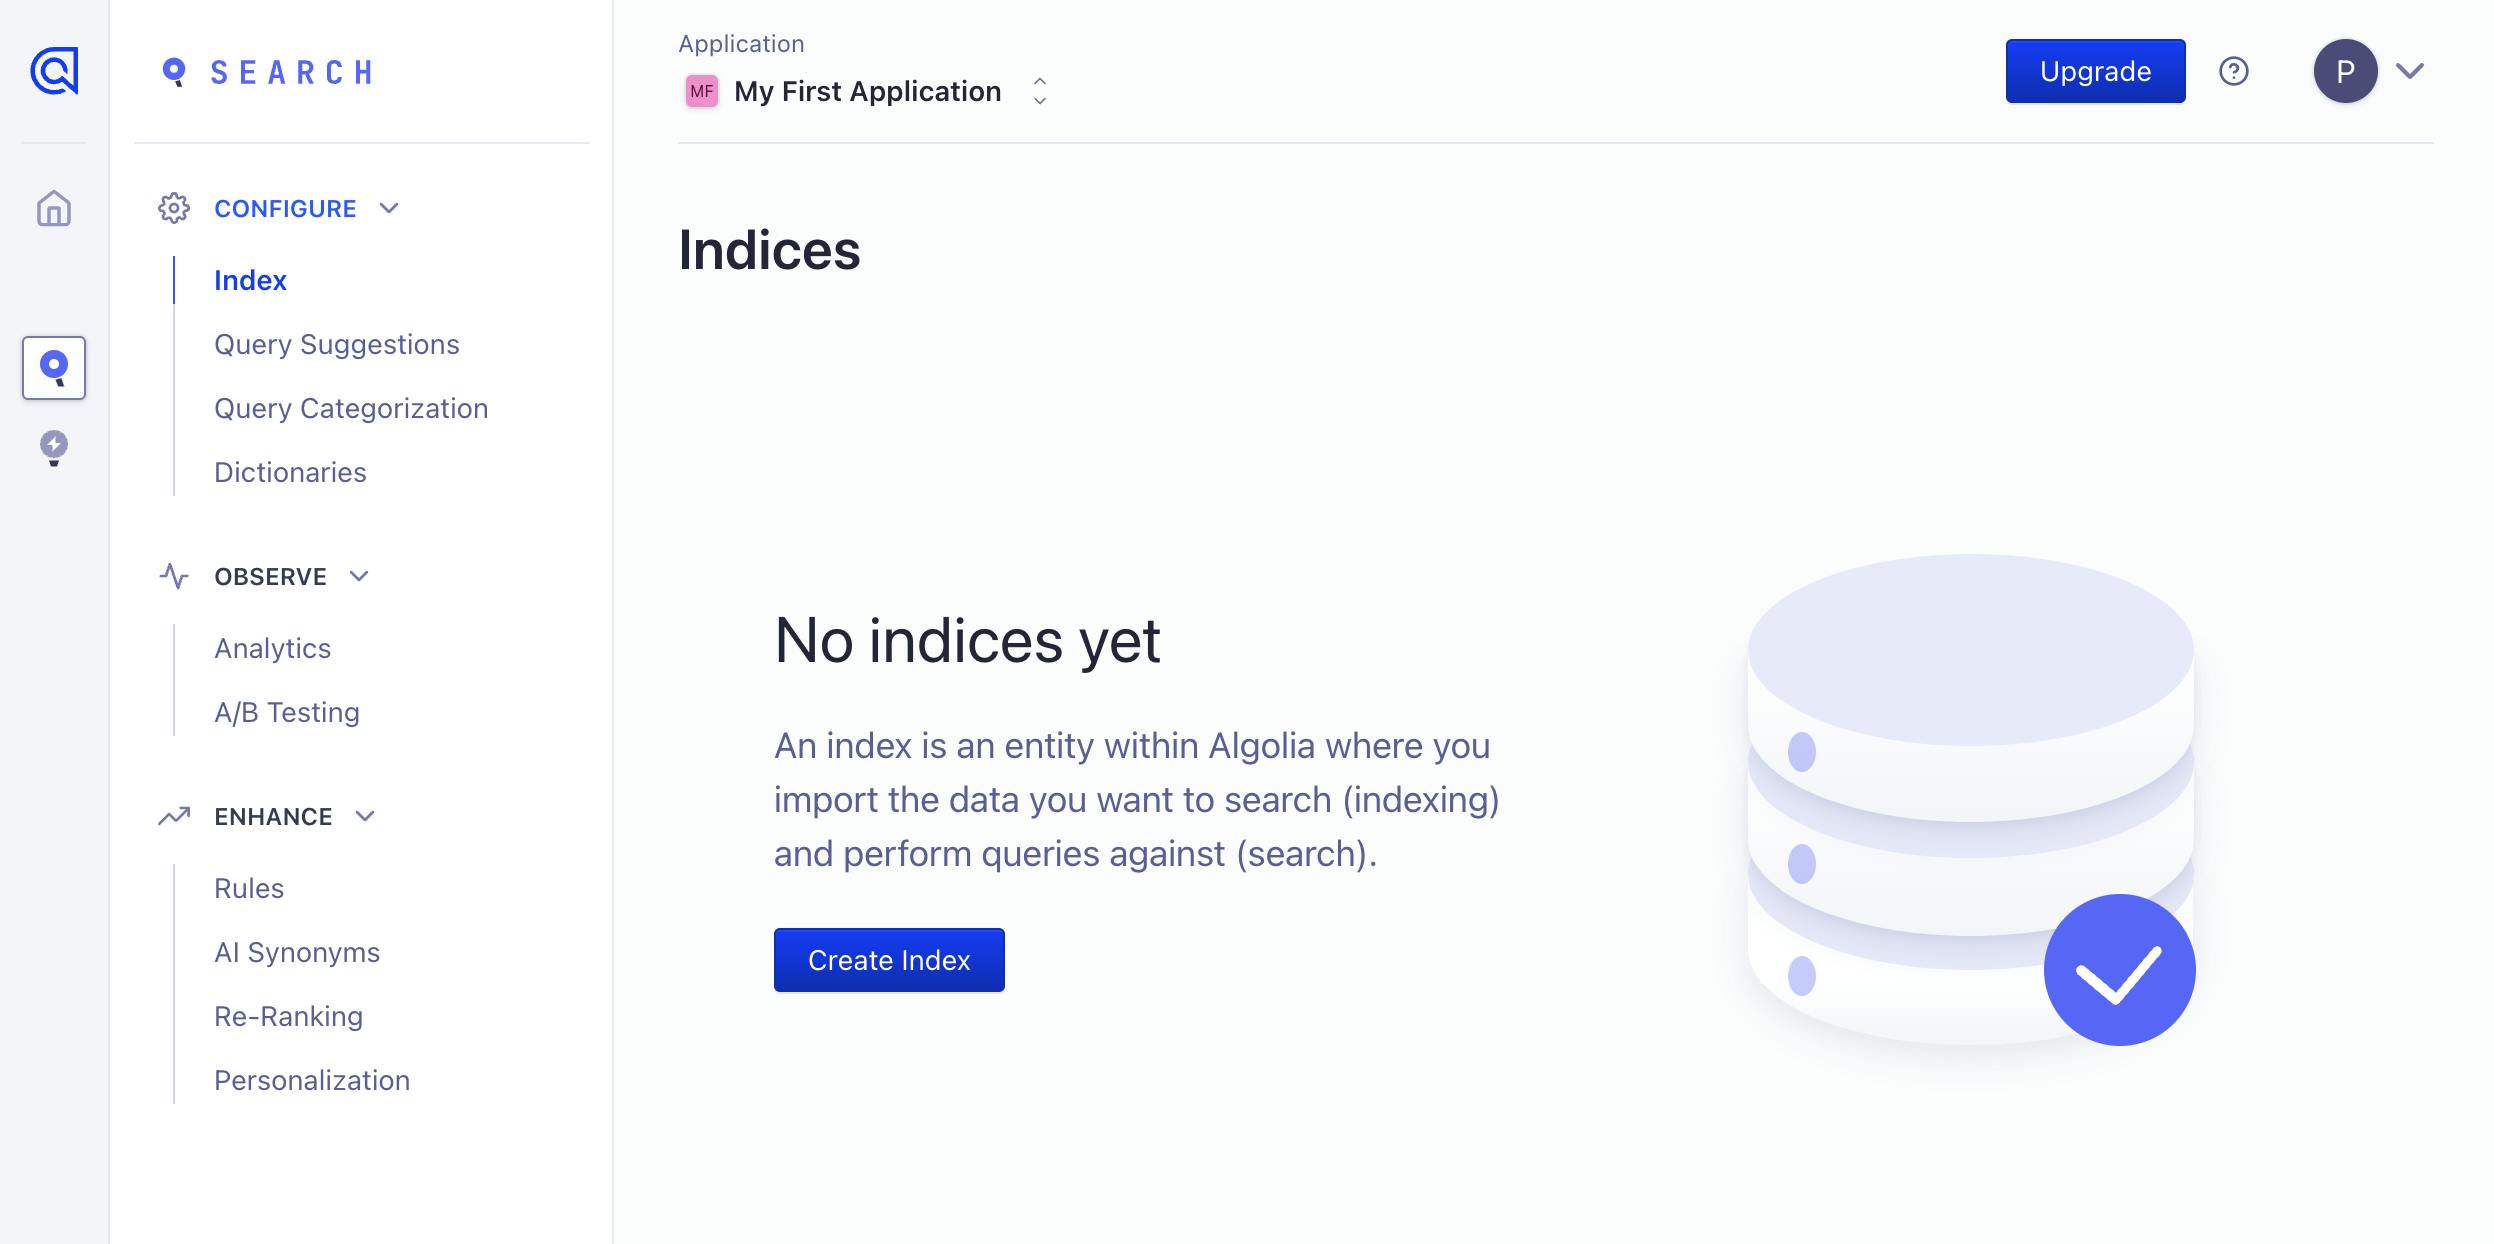 An image of the Algolia UI.